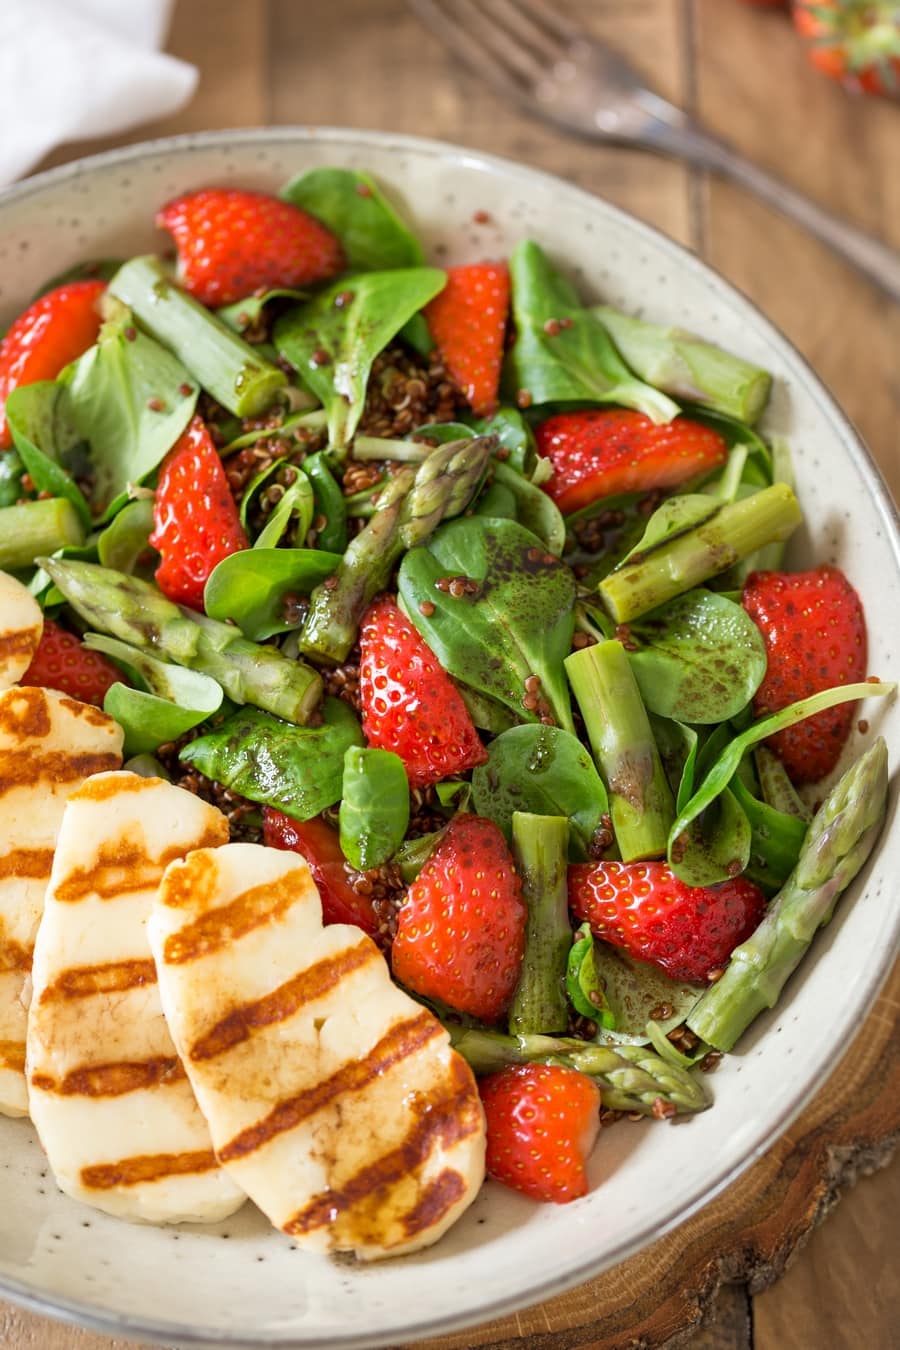 Asparagus and halloumi salad with strawberries and quinoa.